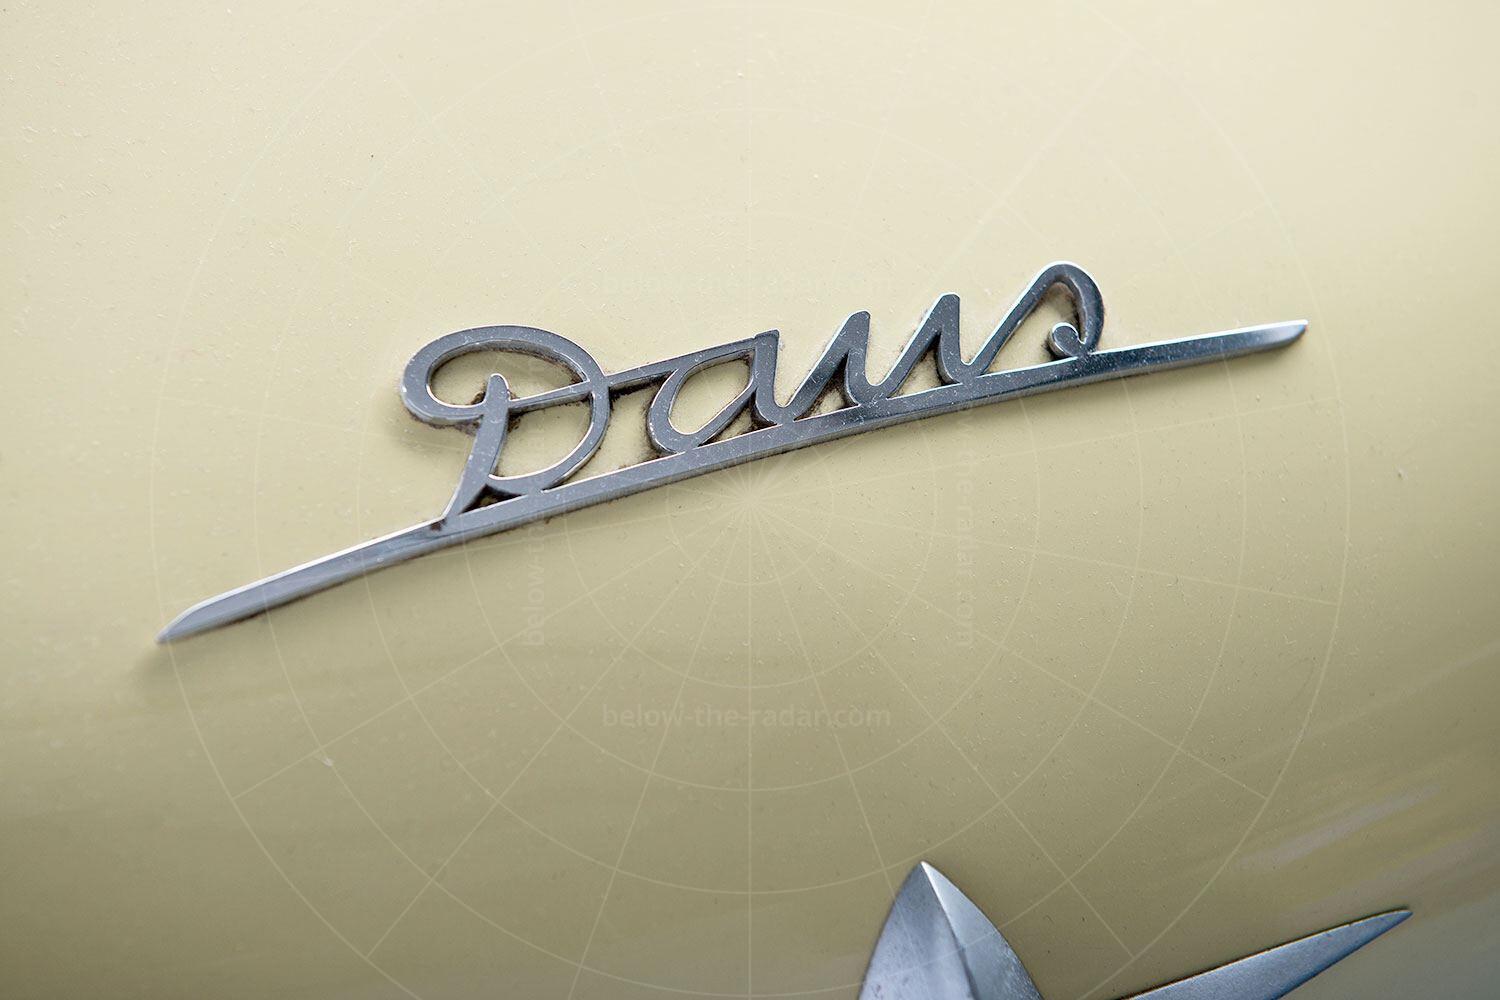 Daus microcar prototype badge Pic: RM Sotheby's | Daus microcar prototype badge